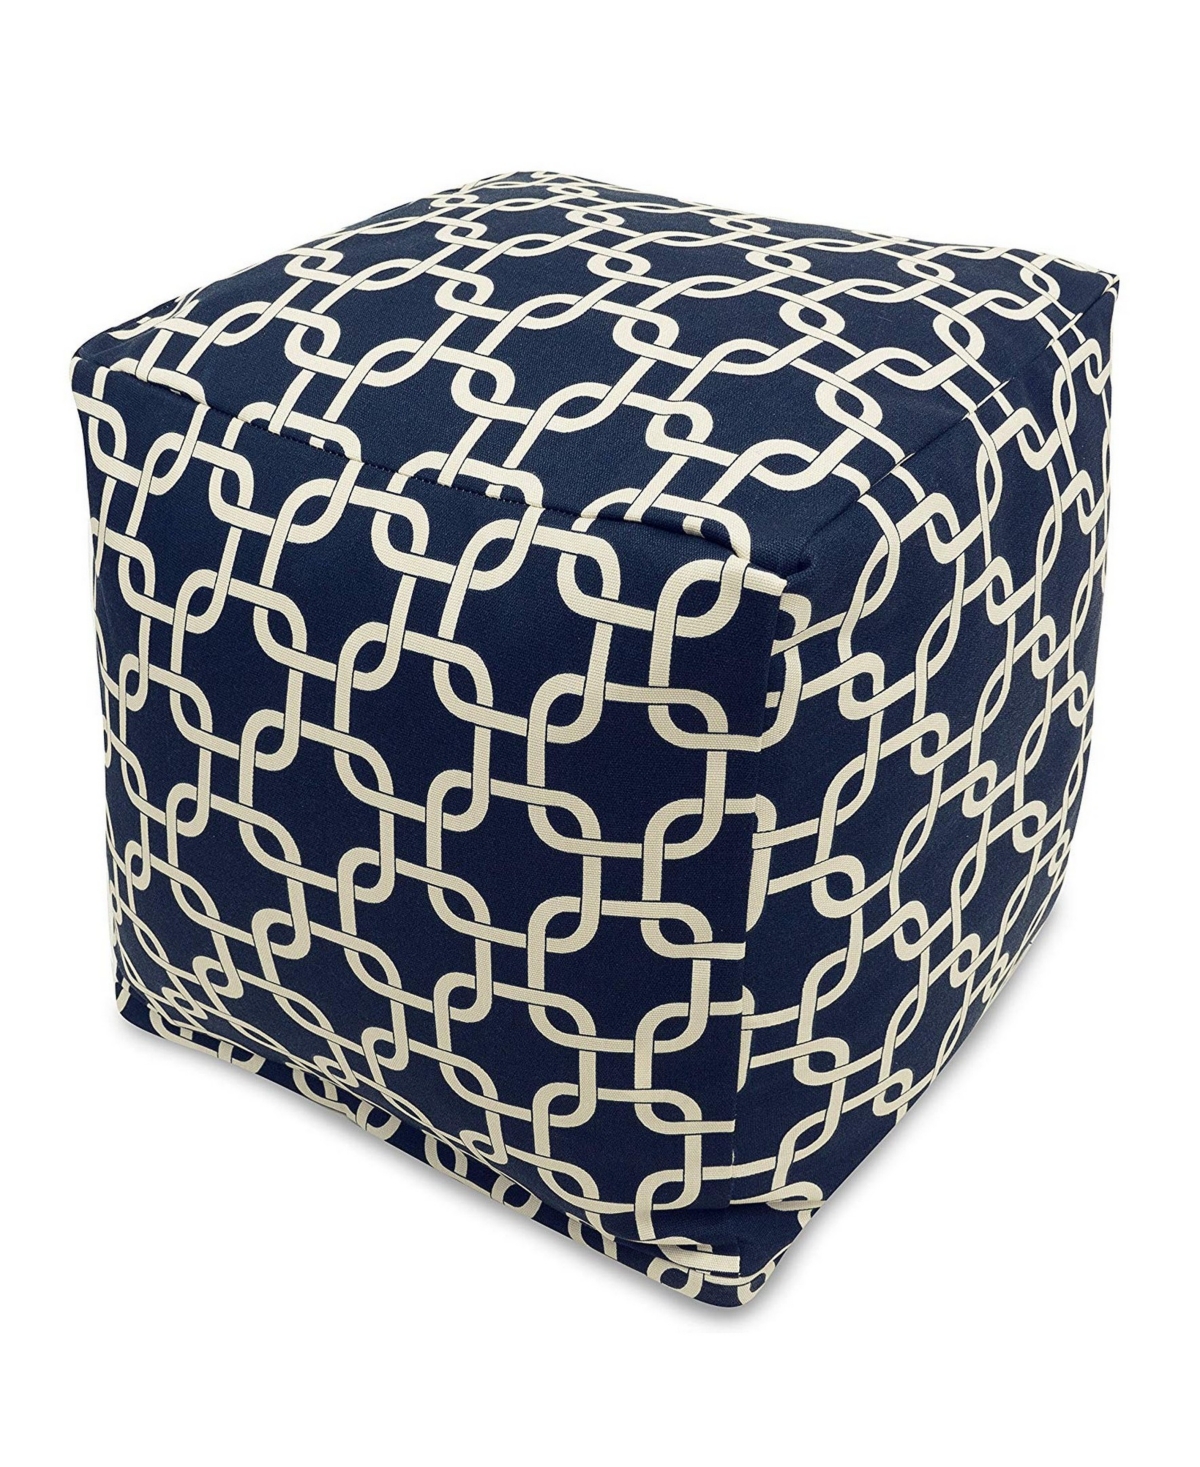 UPC 859072201569 product image for Majestic Home Goods Links Ottoman Pouf Cube with Removable Cover 17